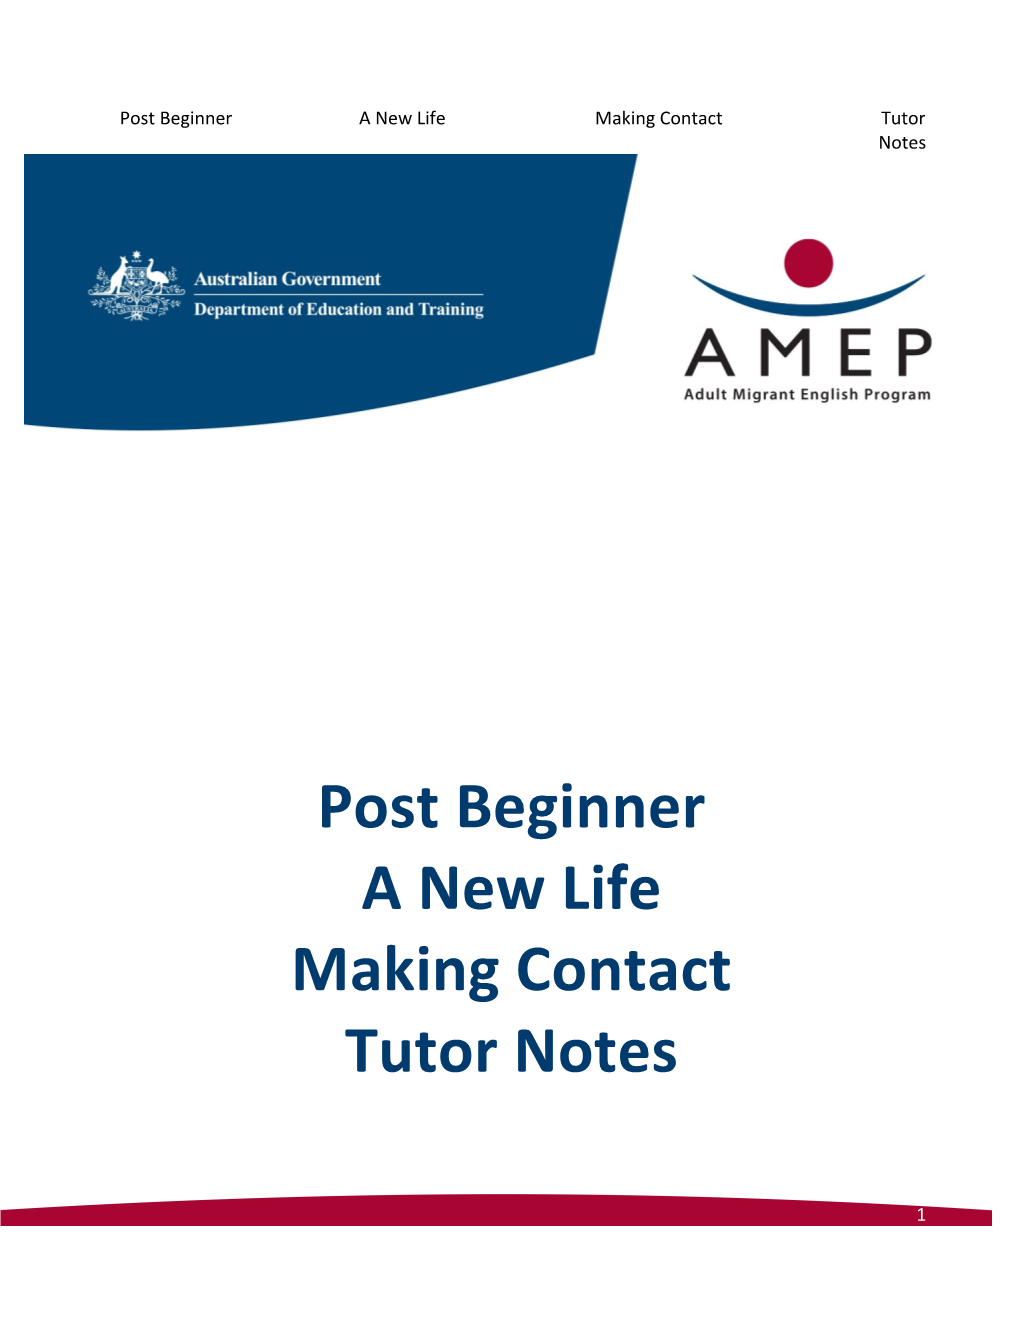 Post Beginner a New Life Making Contact Tutor Notes